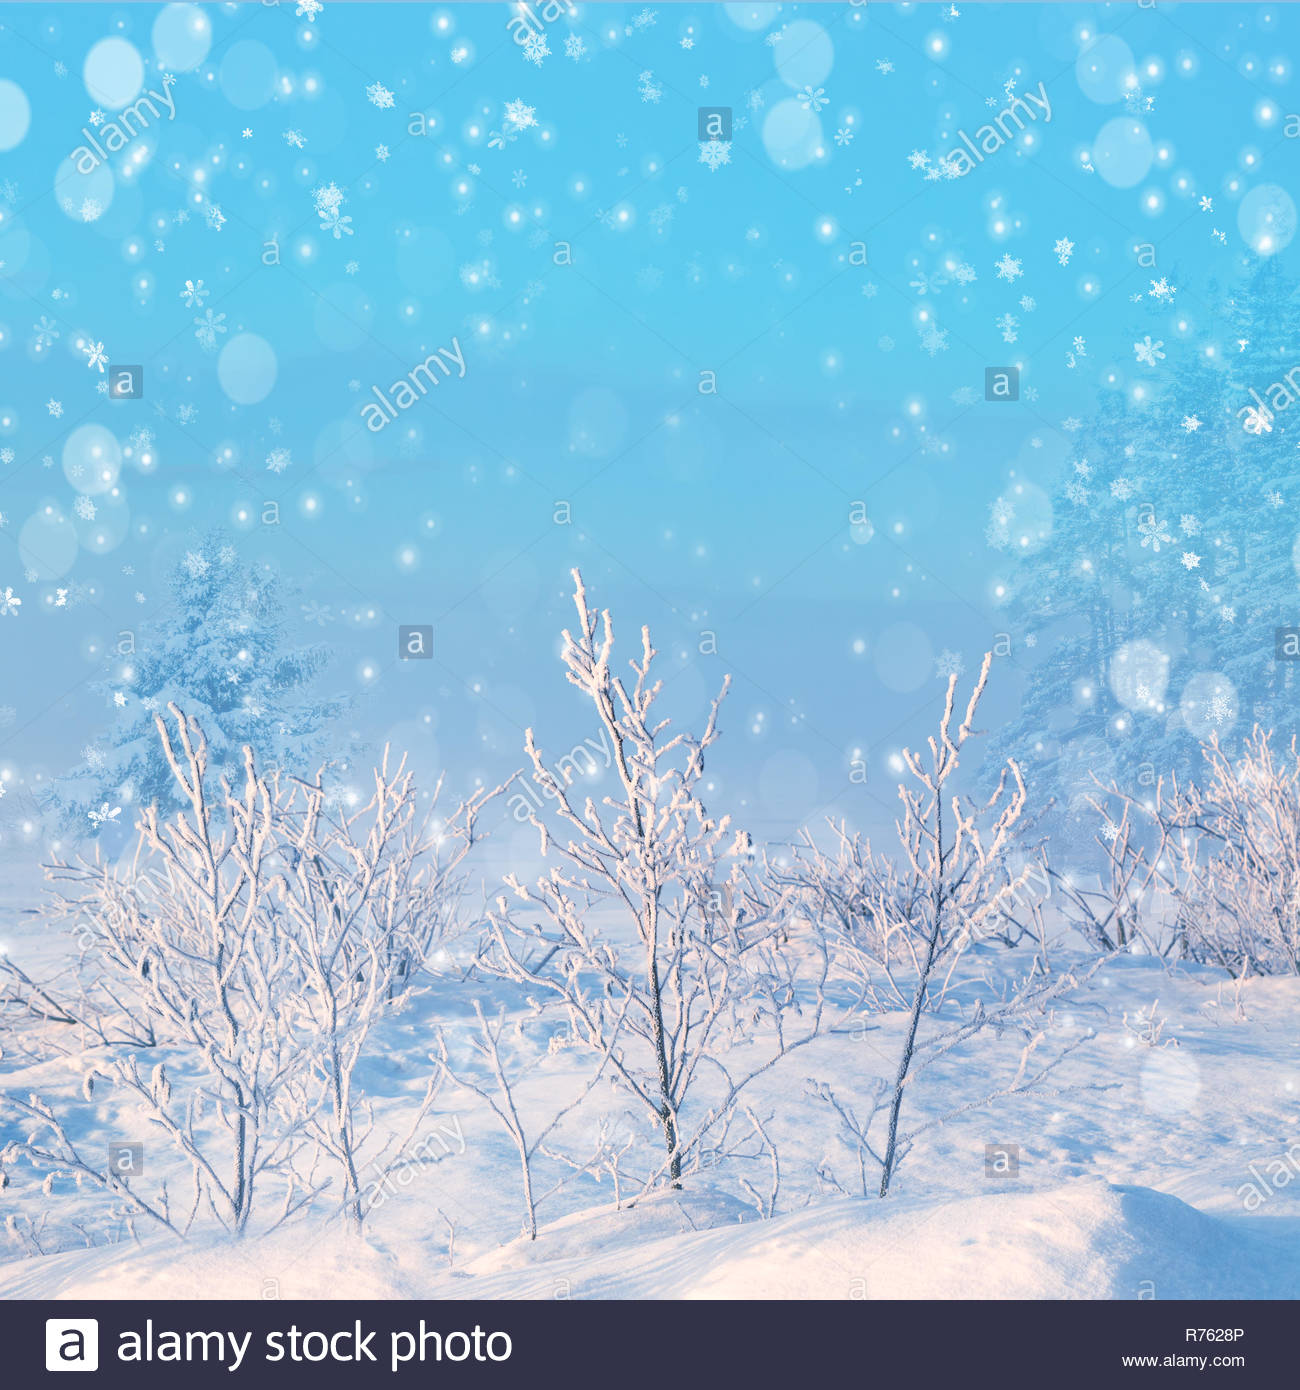 Winter Background Falling Snow Over Landscape With Copy